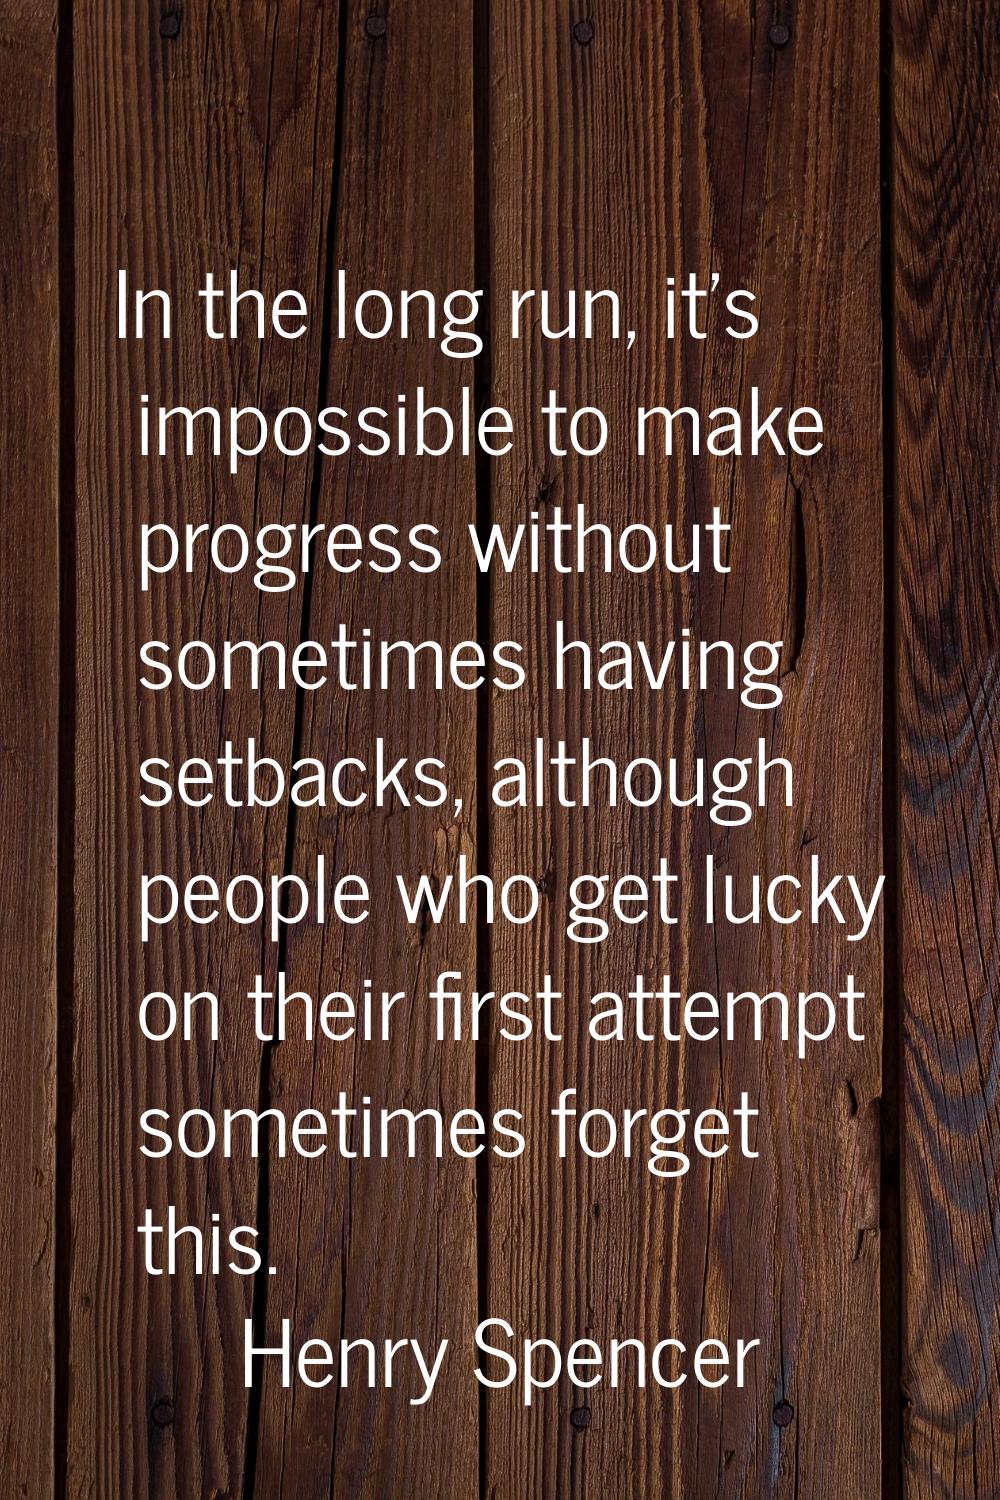 In the long run, it's impossible to make progress without sometimes having setbacks, although peopl